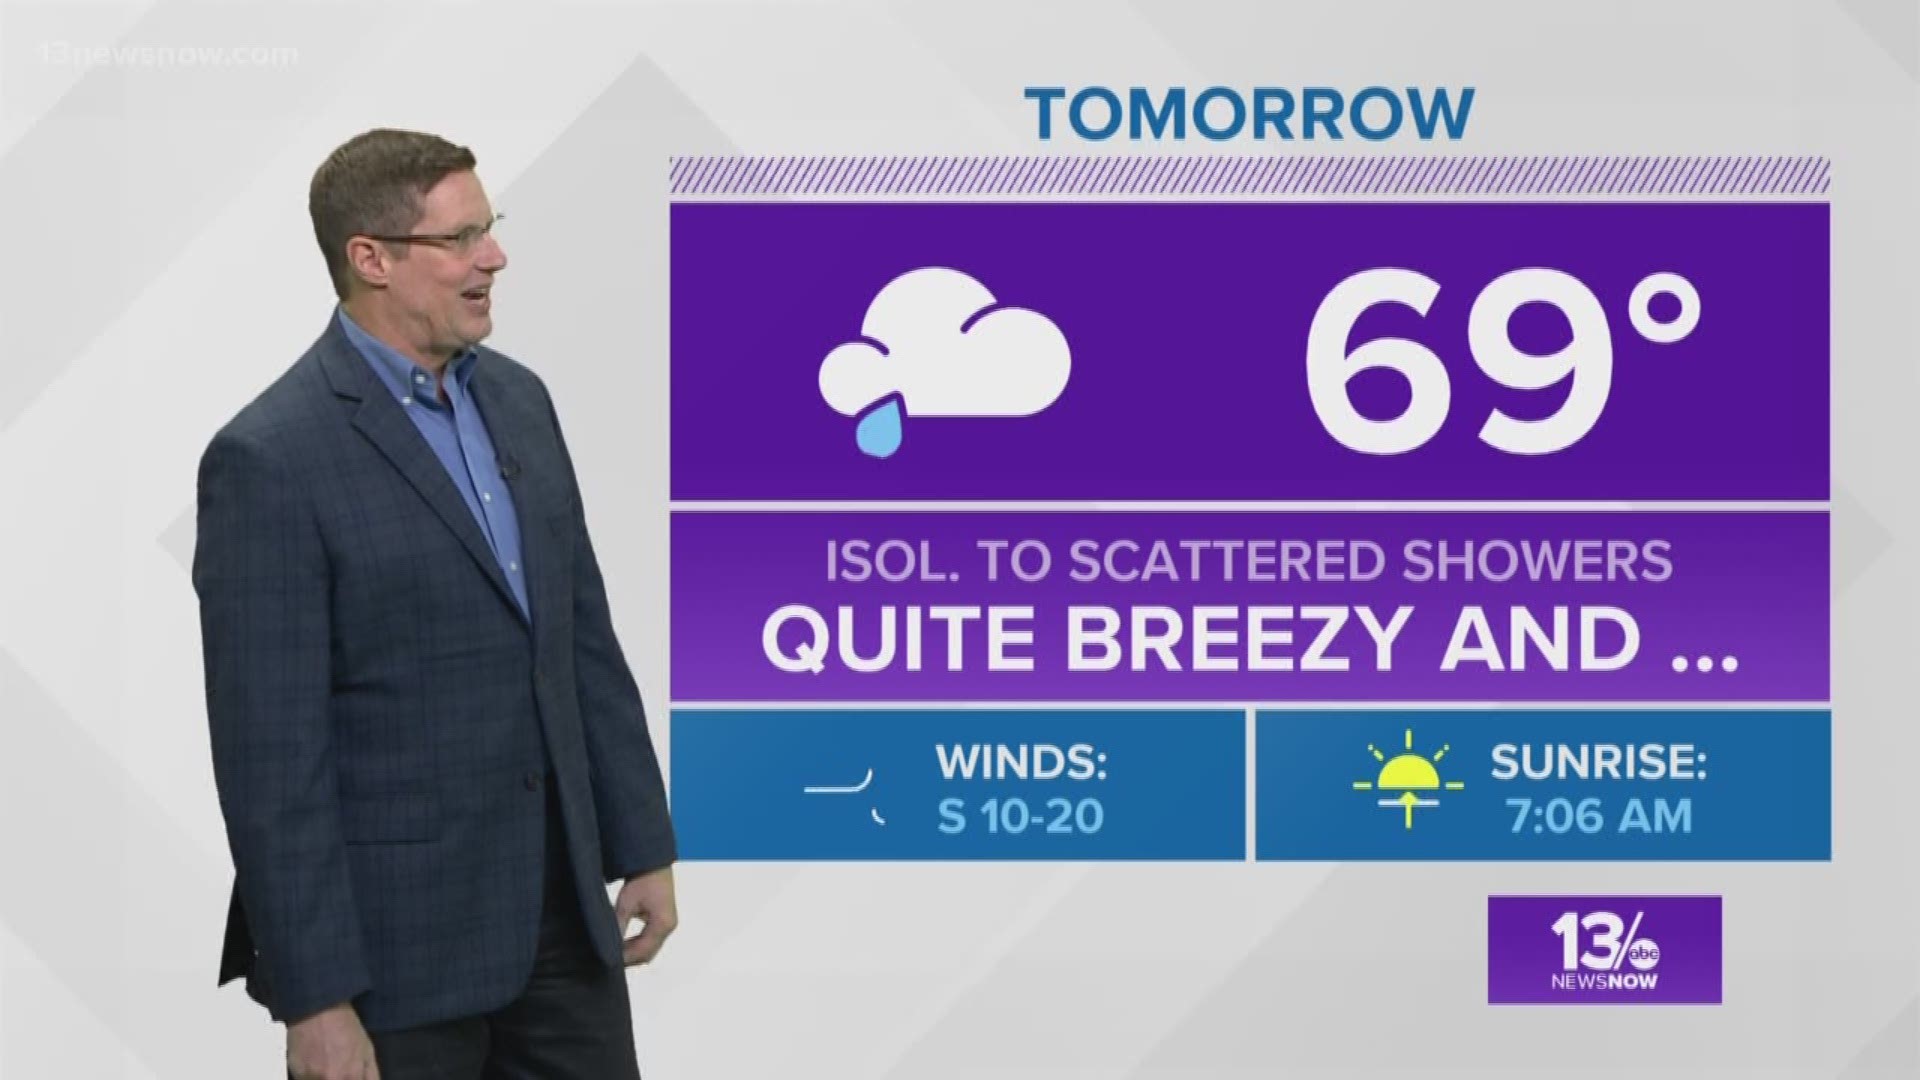 Chief Meteorologist Jeff Lawson brings you the forecast from the Weather Authority.